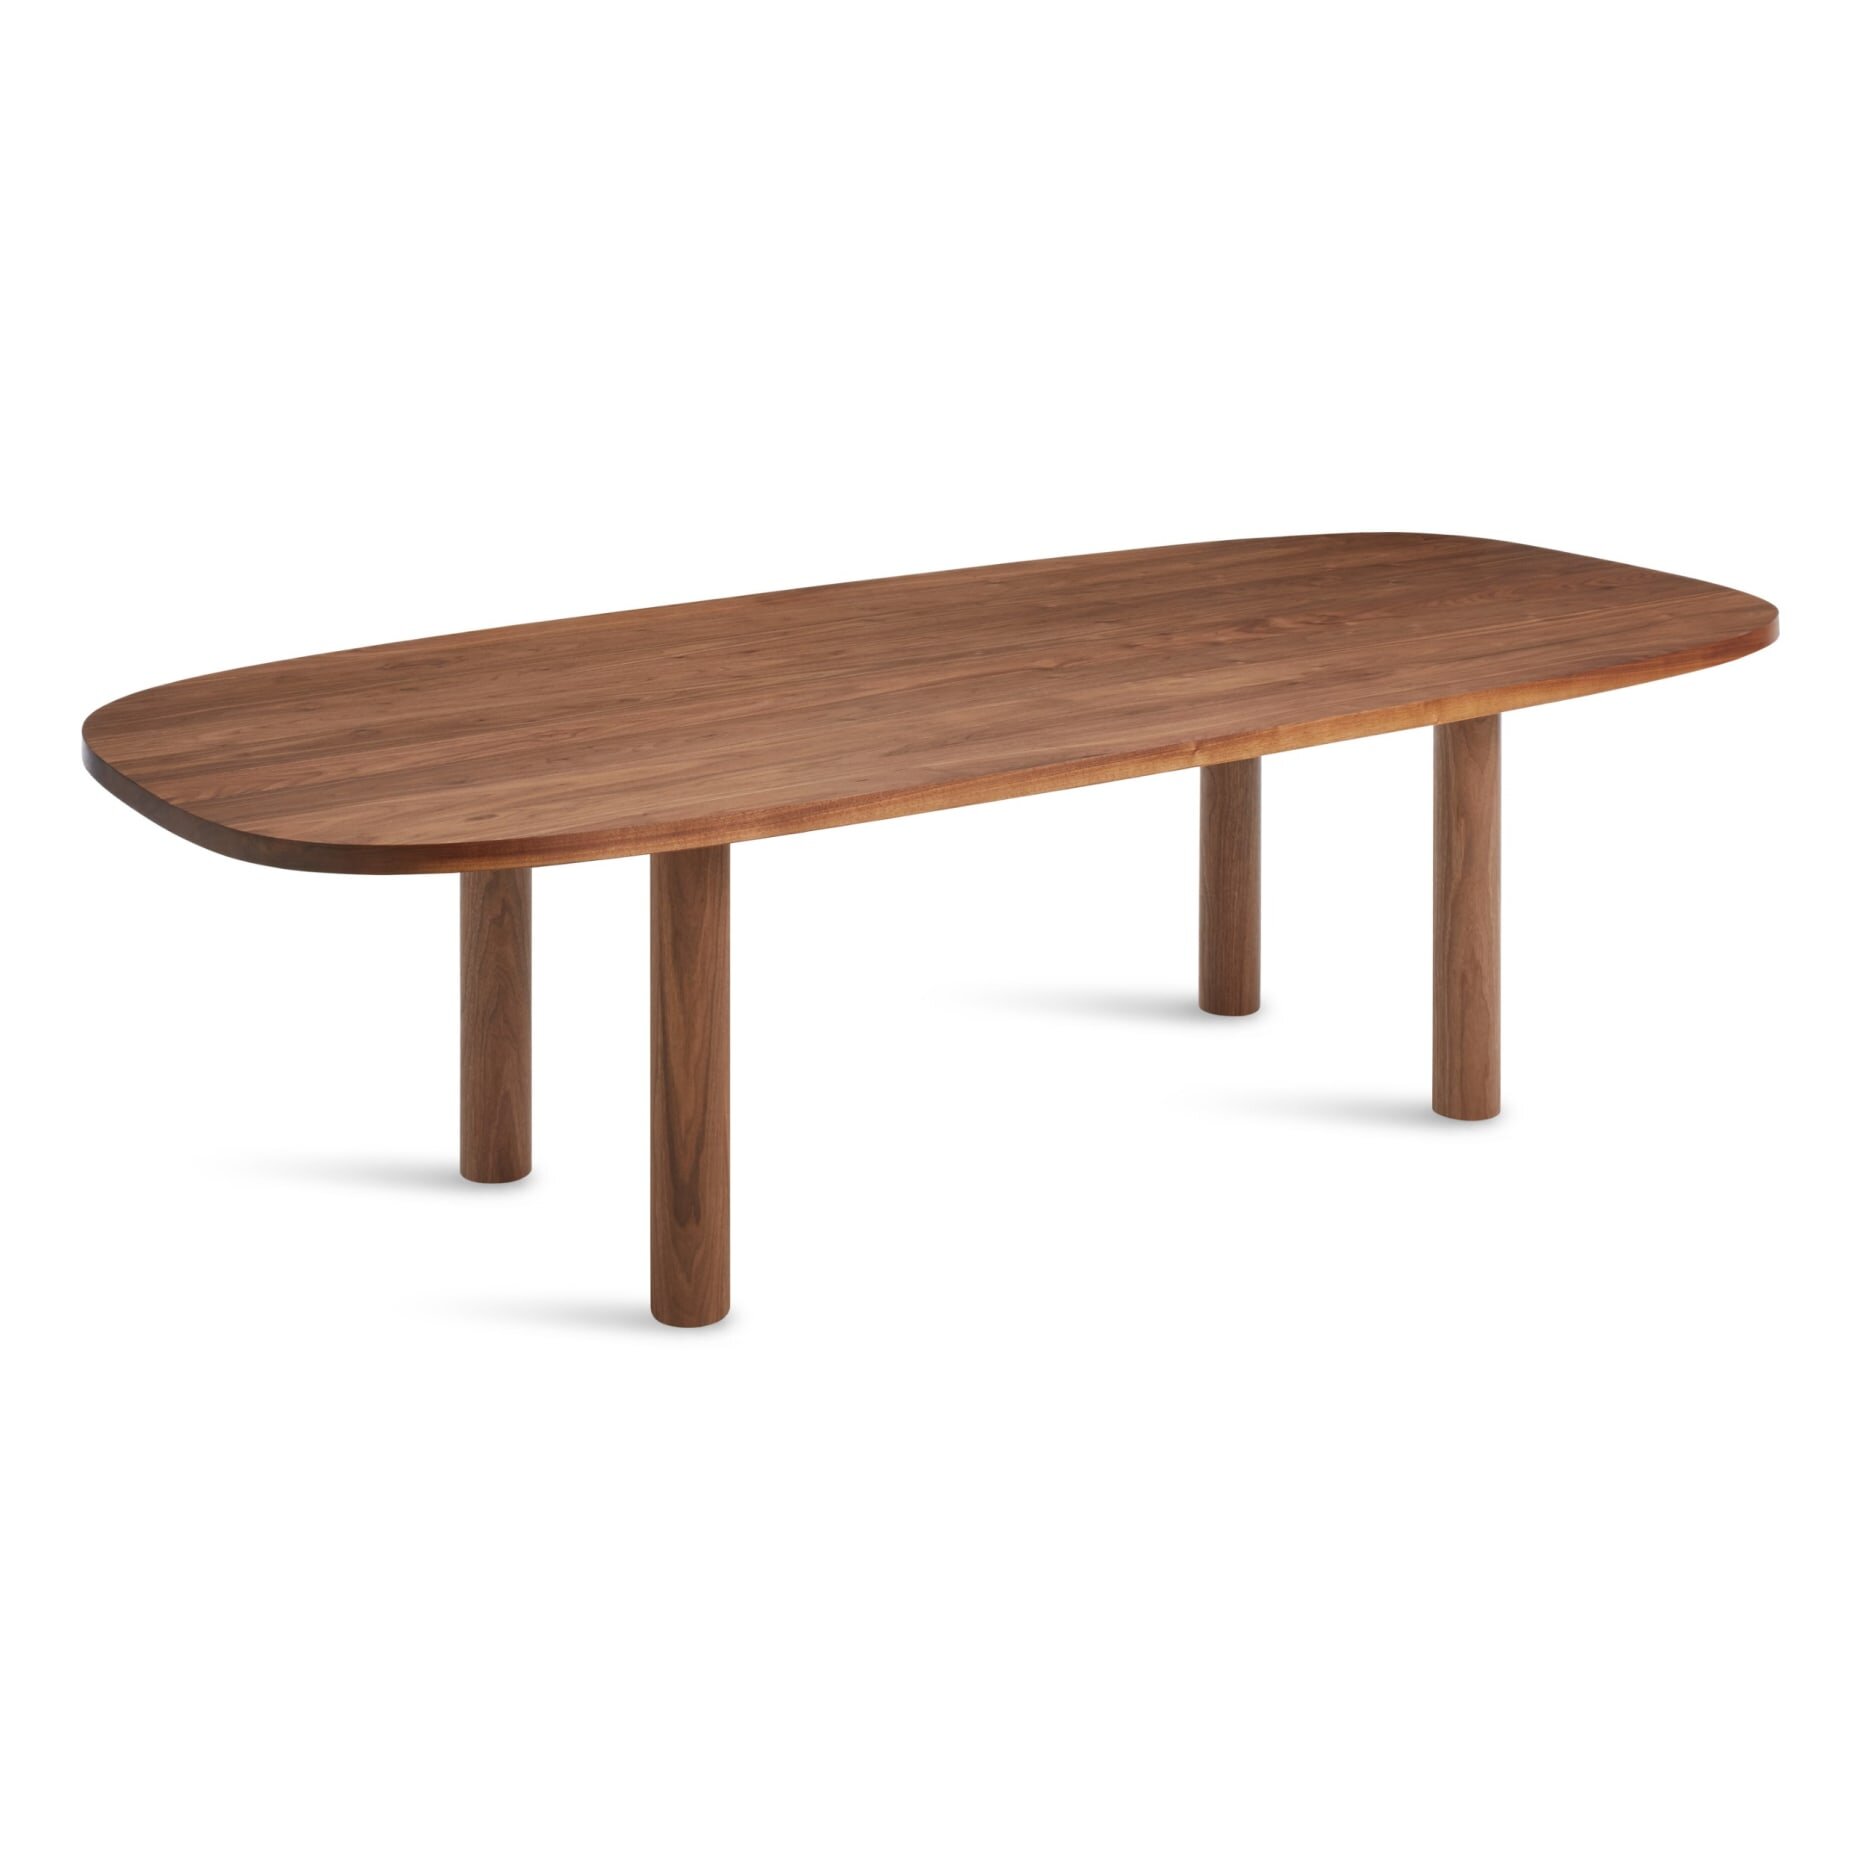 【Archetypal】Good Times Dining Table | Dining Table by Blu Dot | Hong Kong